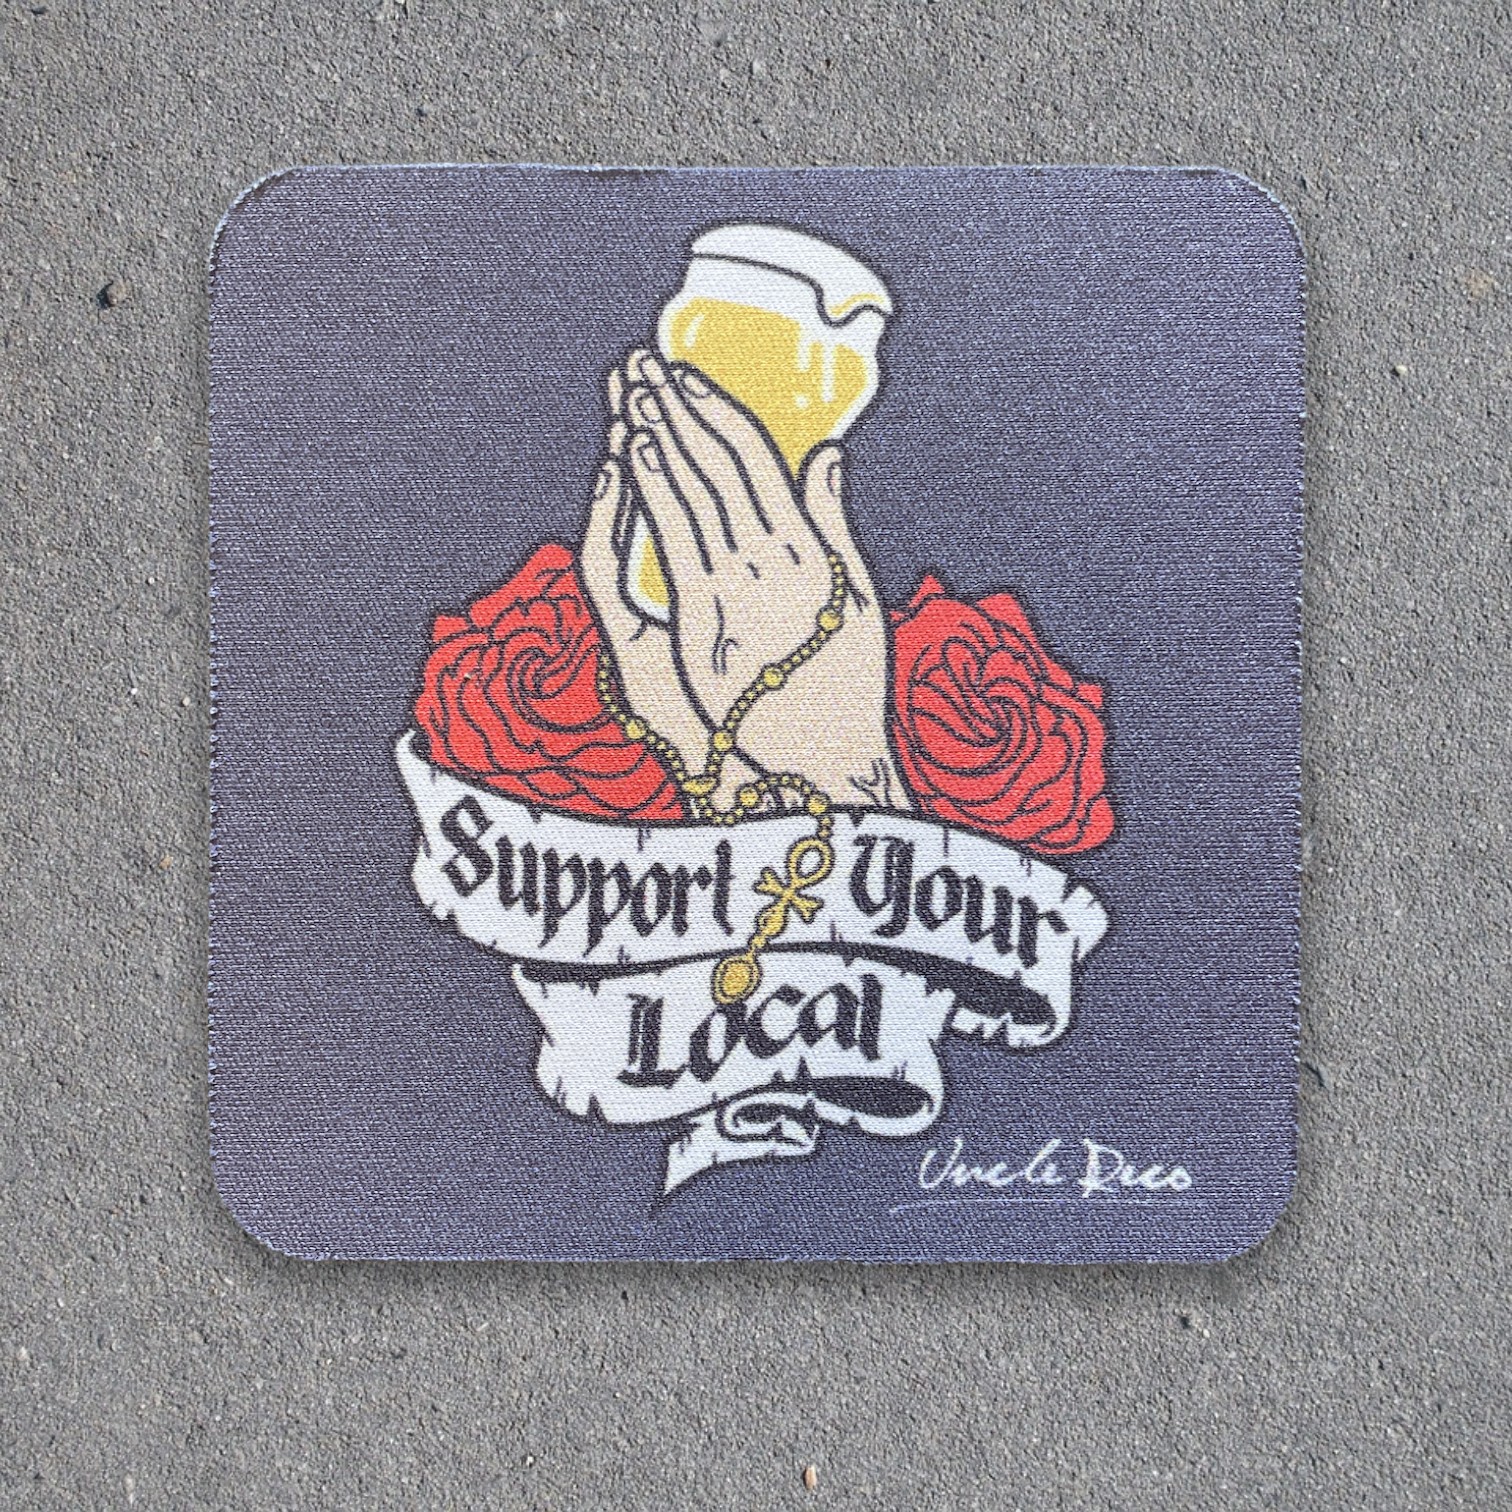 SUPPORT YOUR LOCAL COASTER